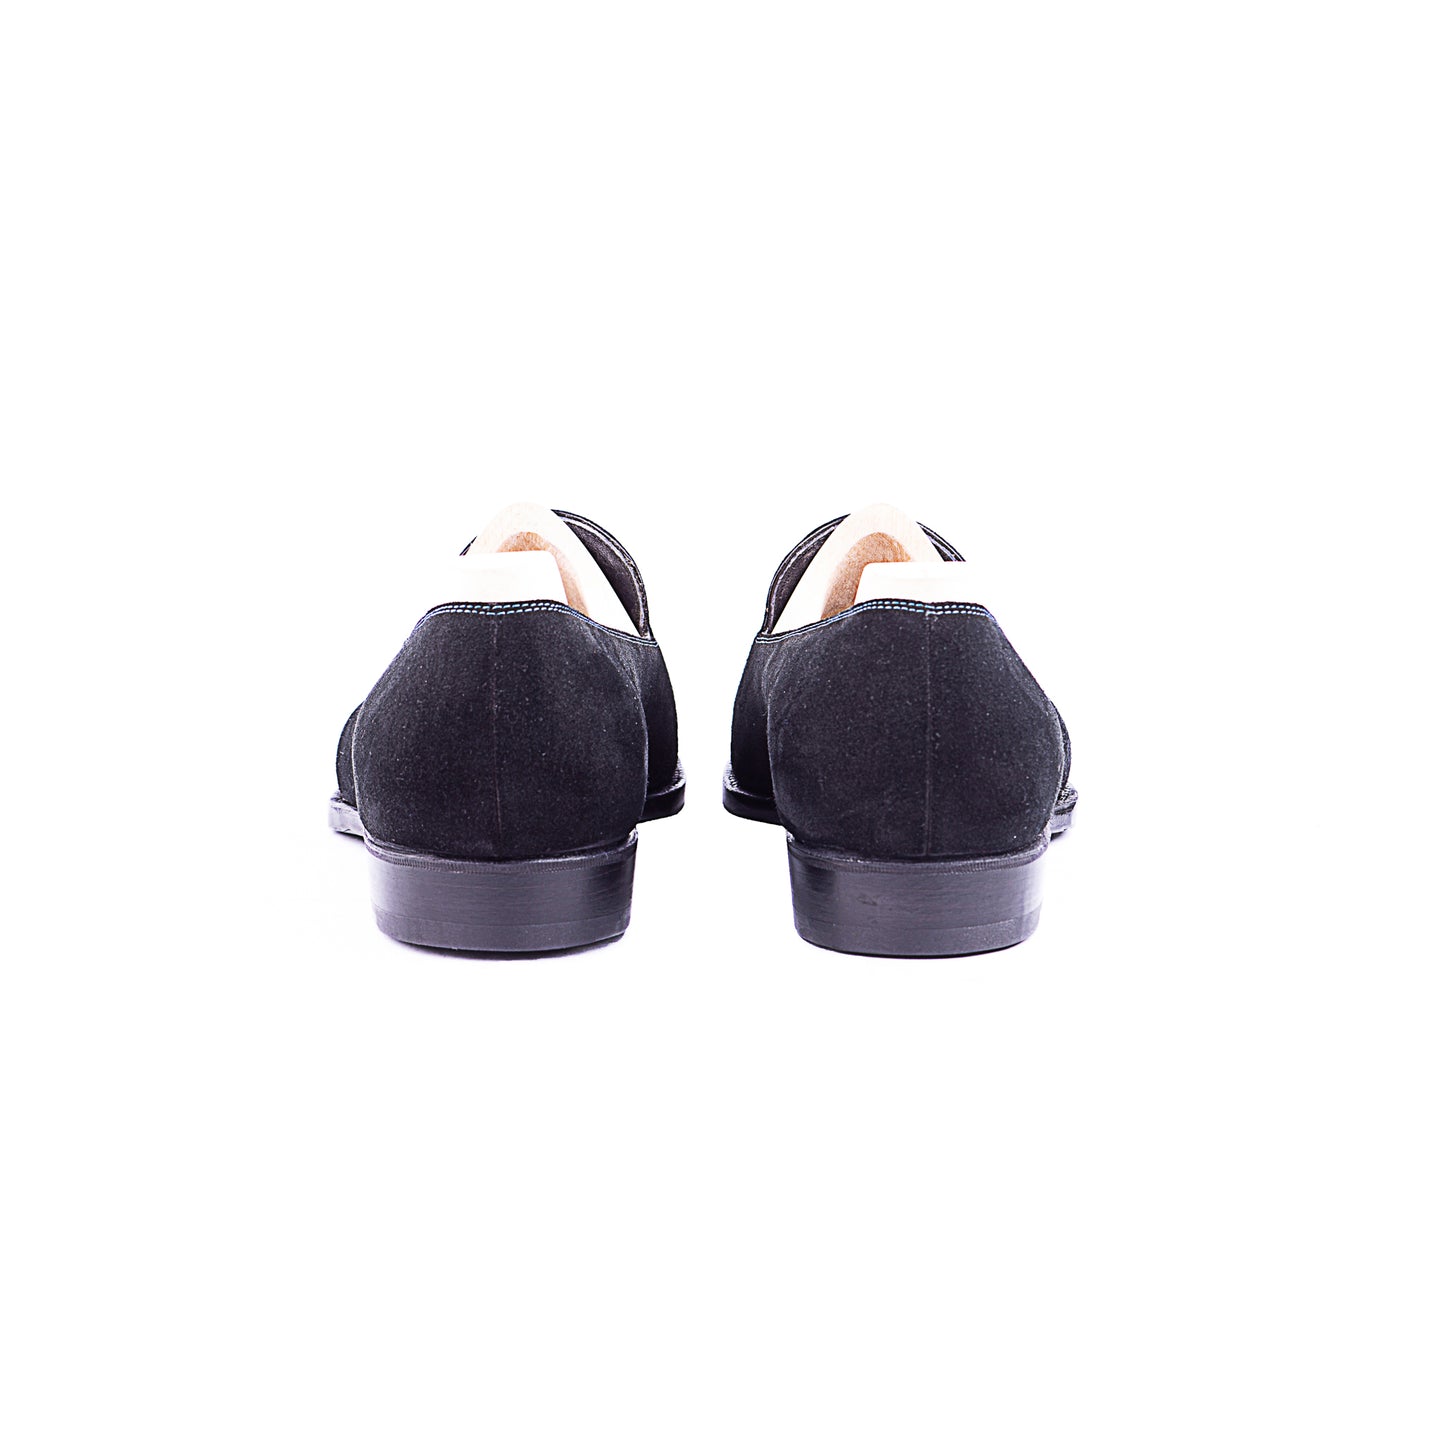 Plain Loafer with apron